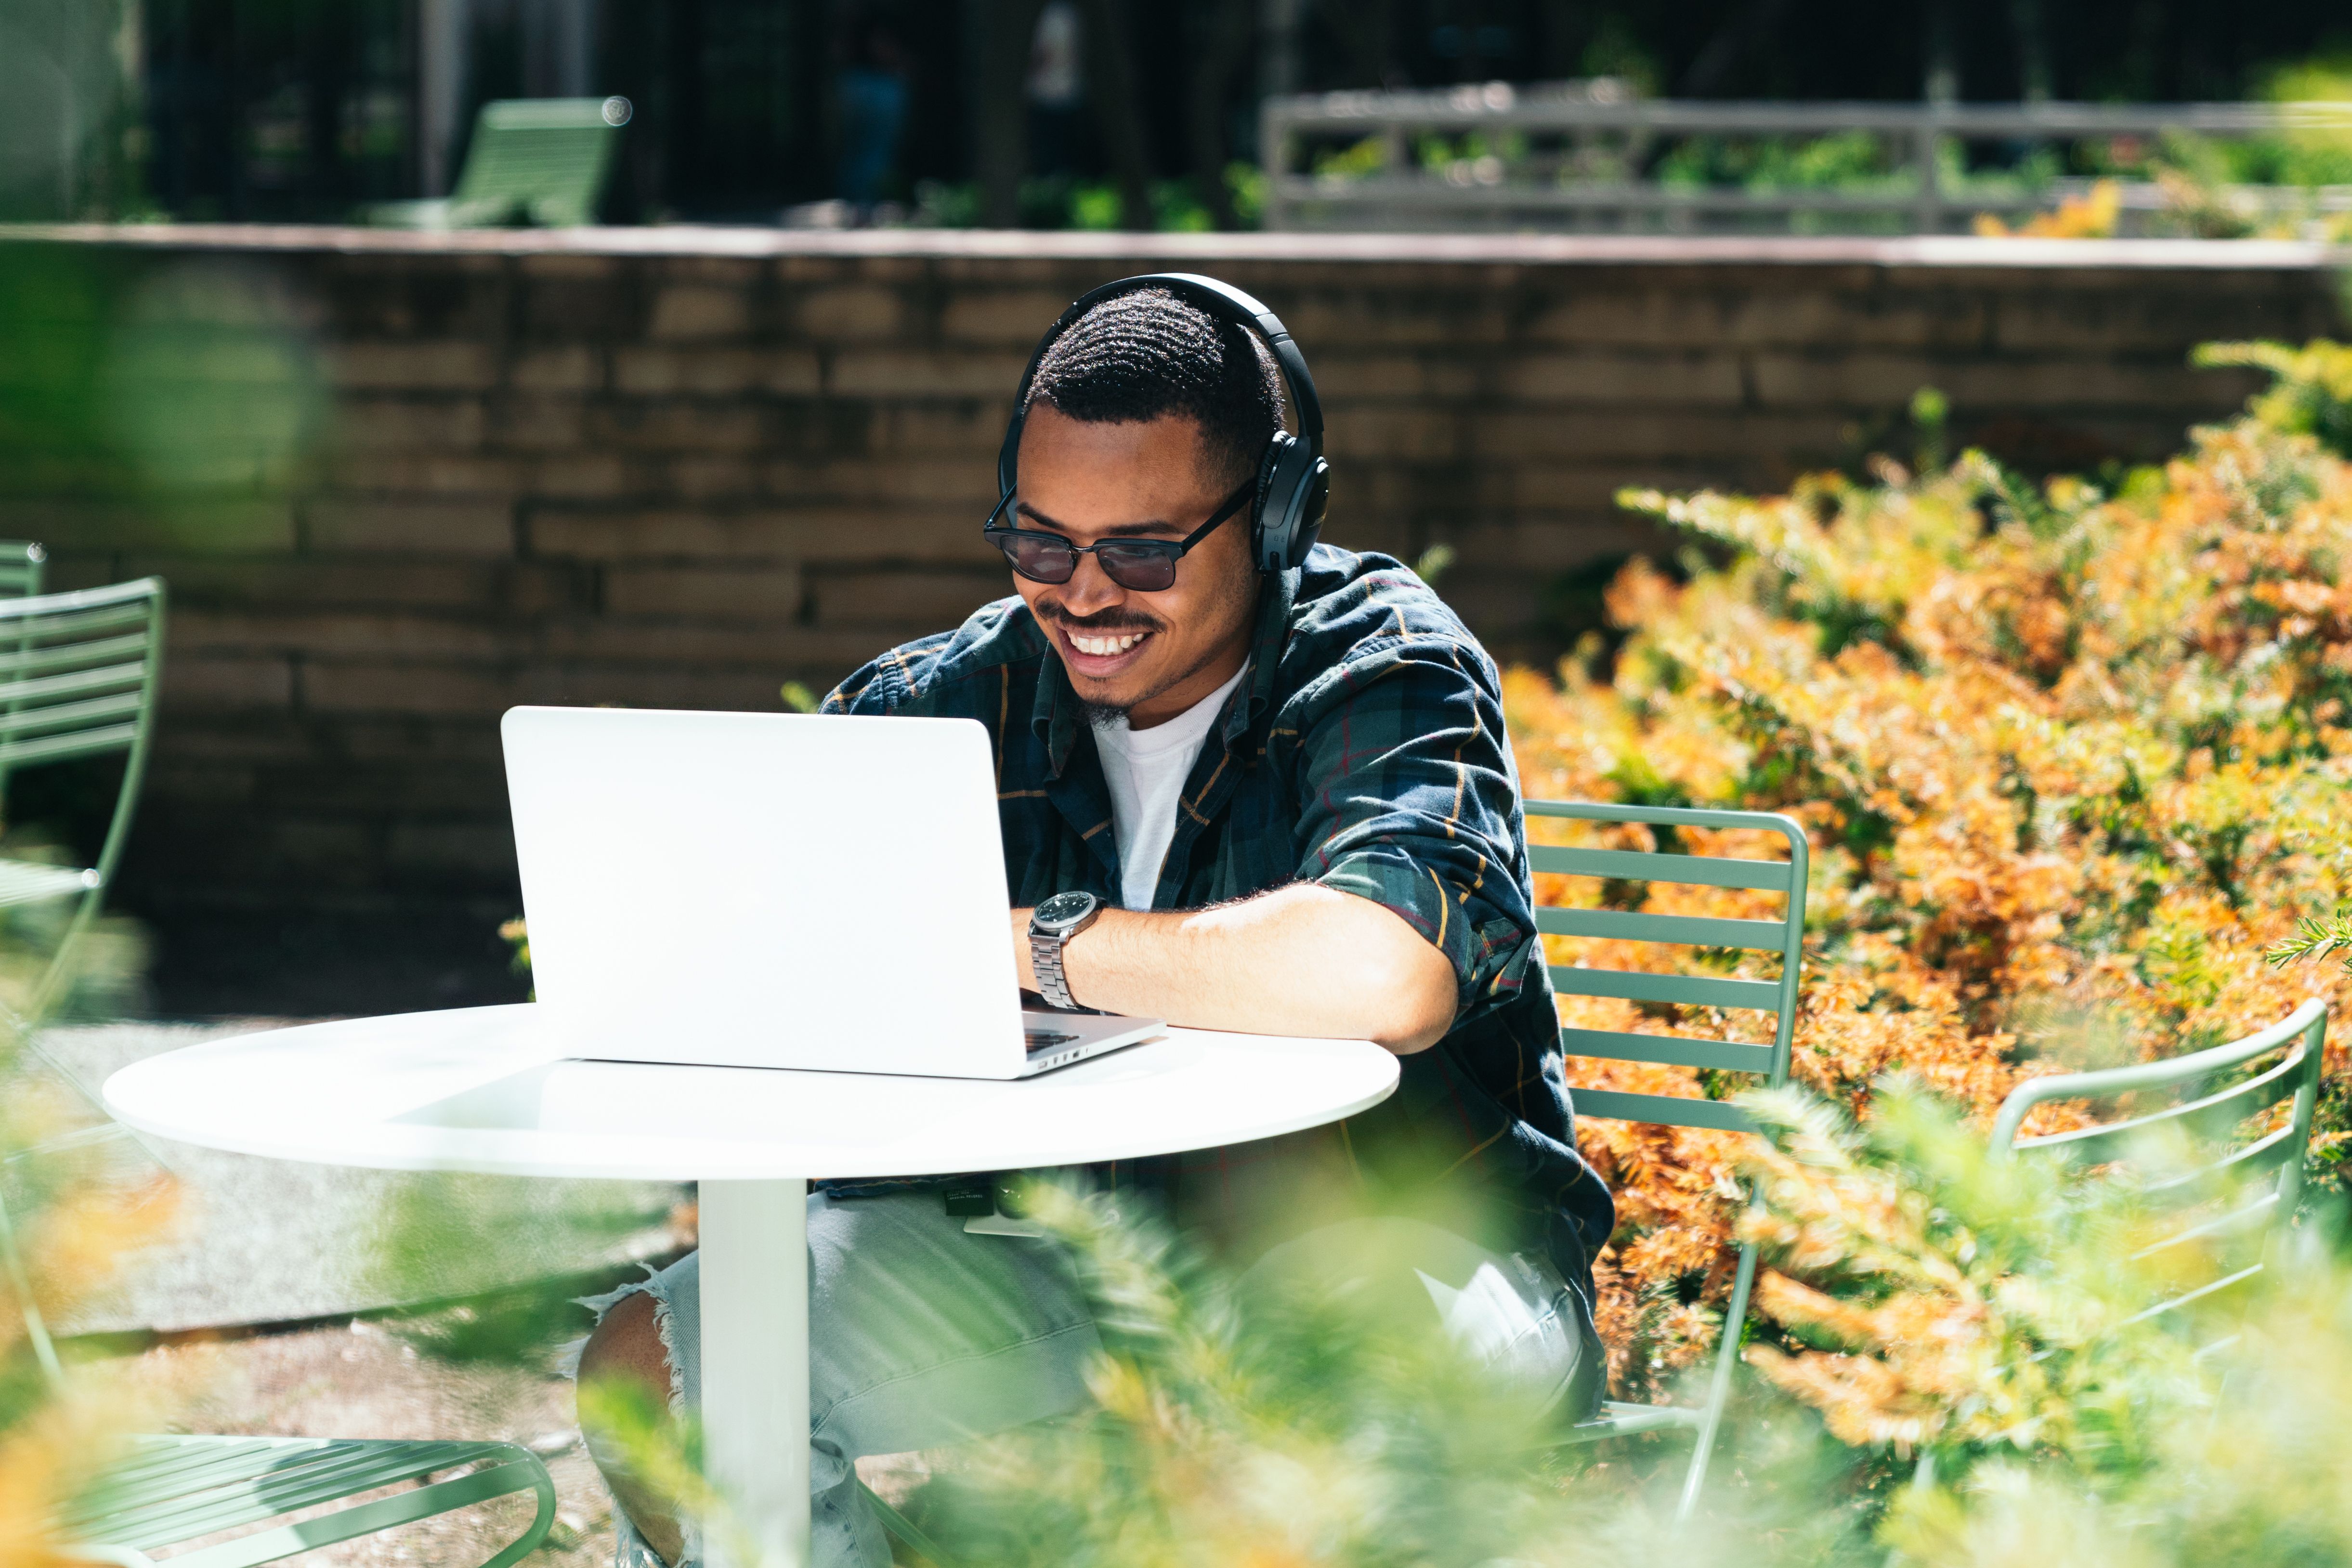 A person wearing headphones and sunglasses works at a laptop outside.